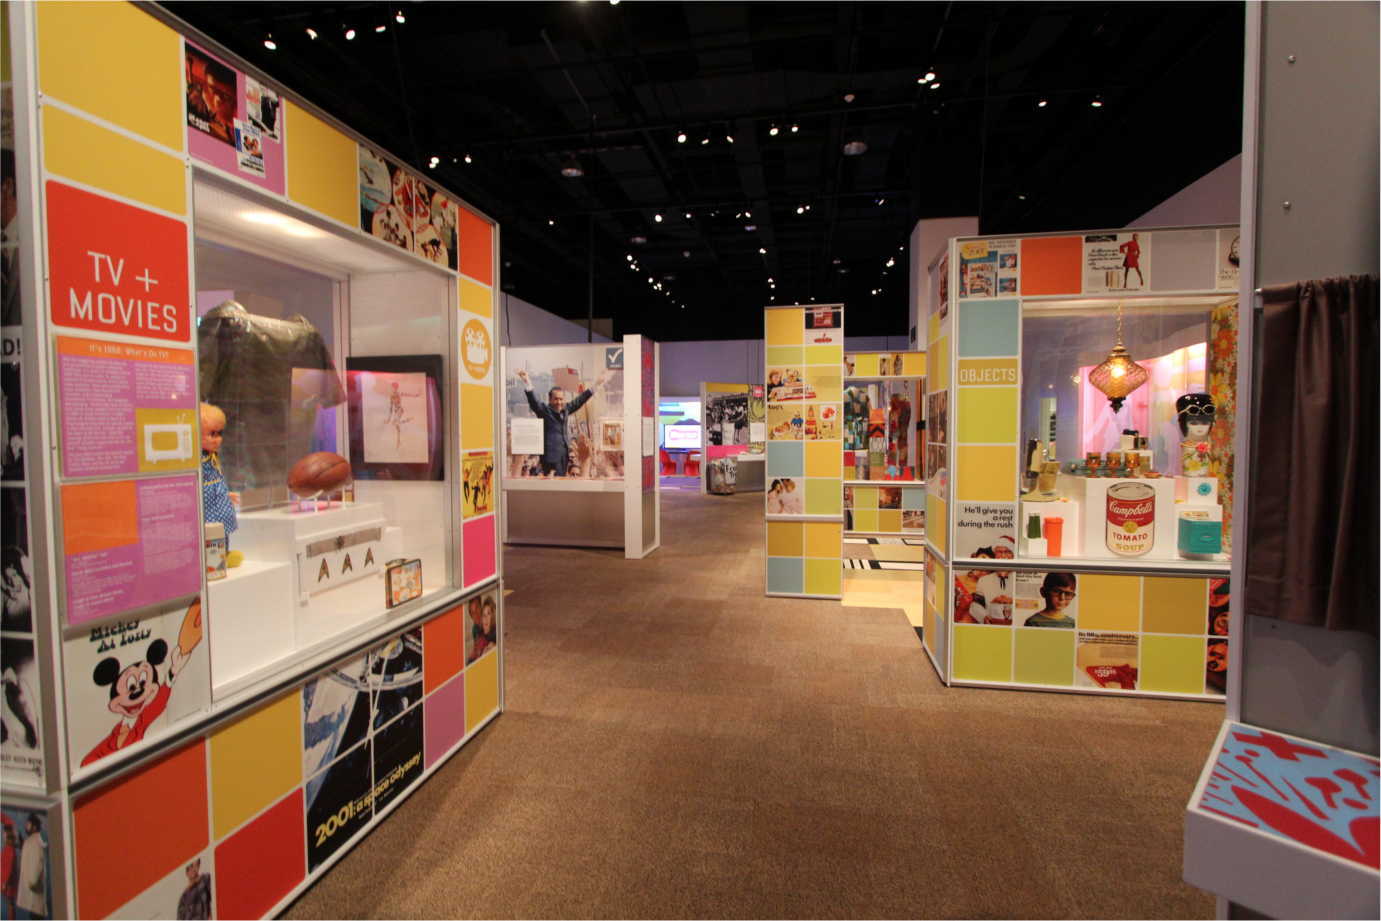 A portion of *The 1968 Exhibit*, a popular traveling exhibition created with funding from the National Endowment for the Humanities. Image courtesy of the Minnesota Historical Society.